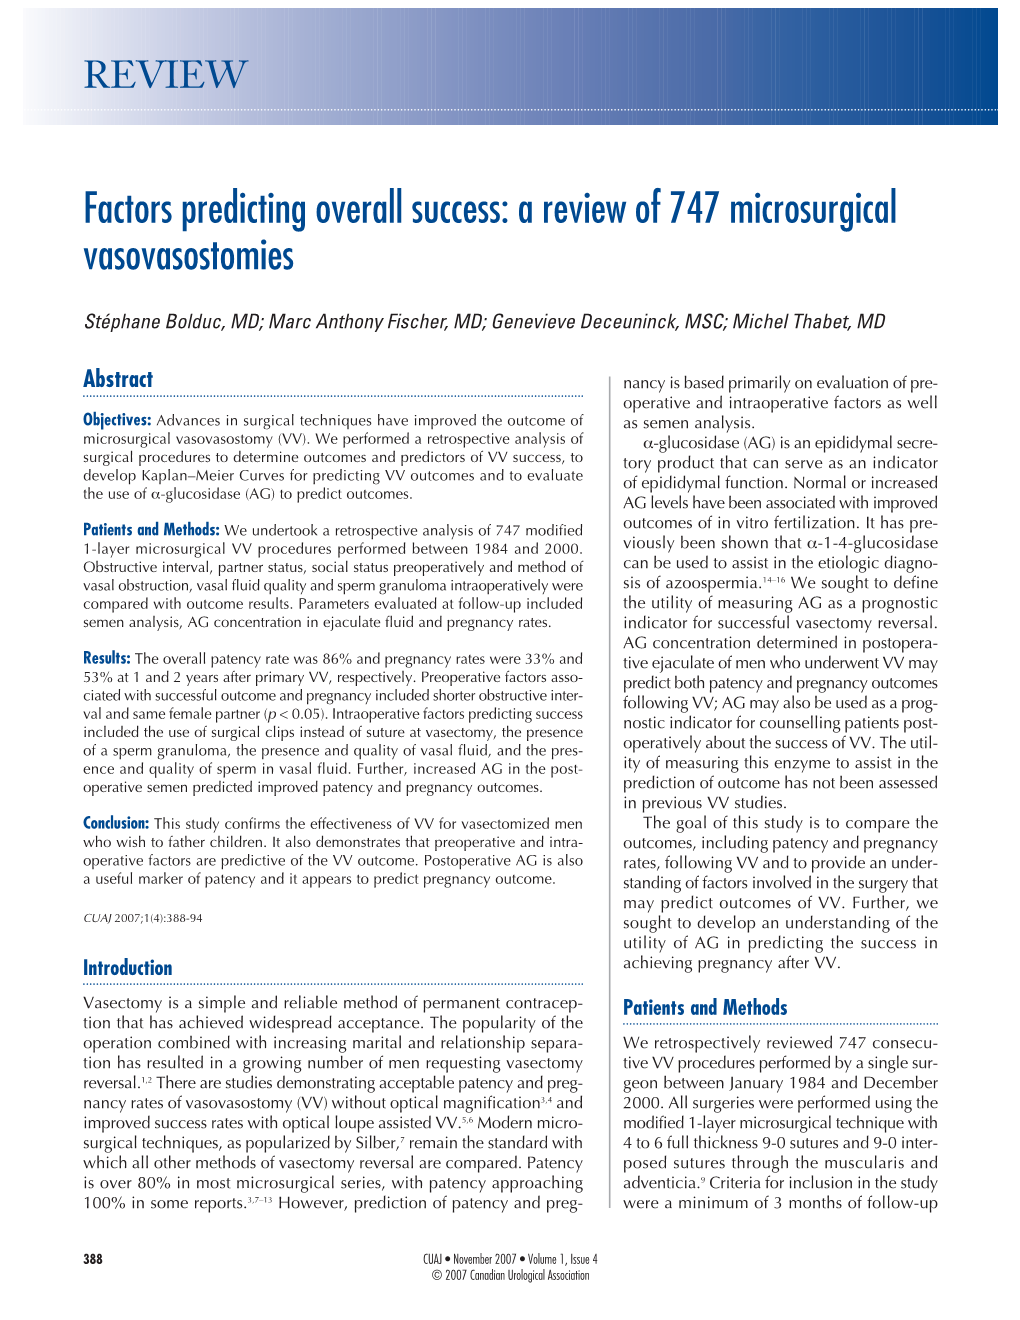 Factors Predicting Overall Success: a Review of 747 Microsurgical Vasovasostomies